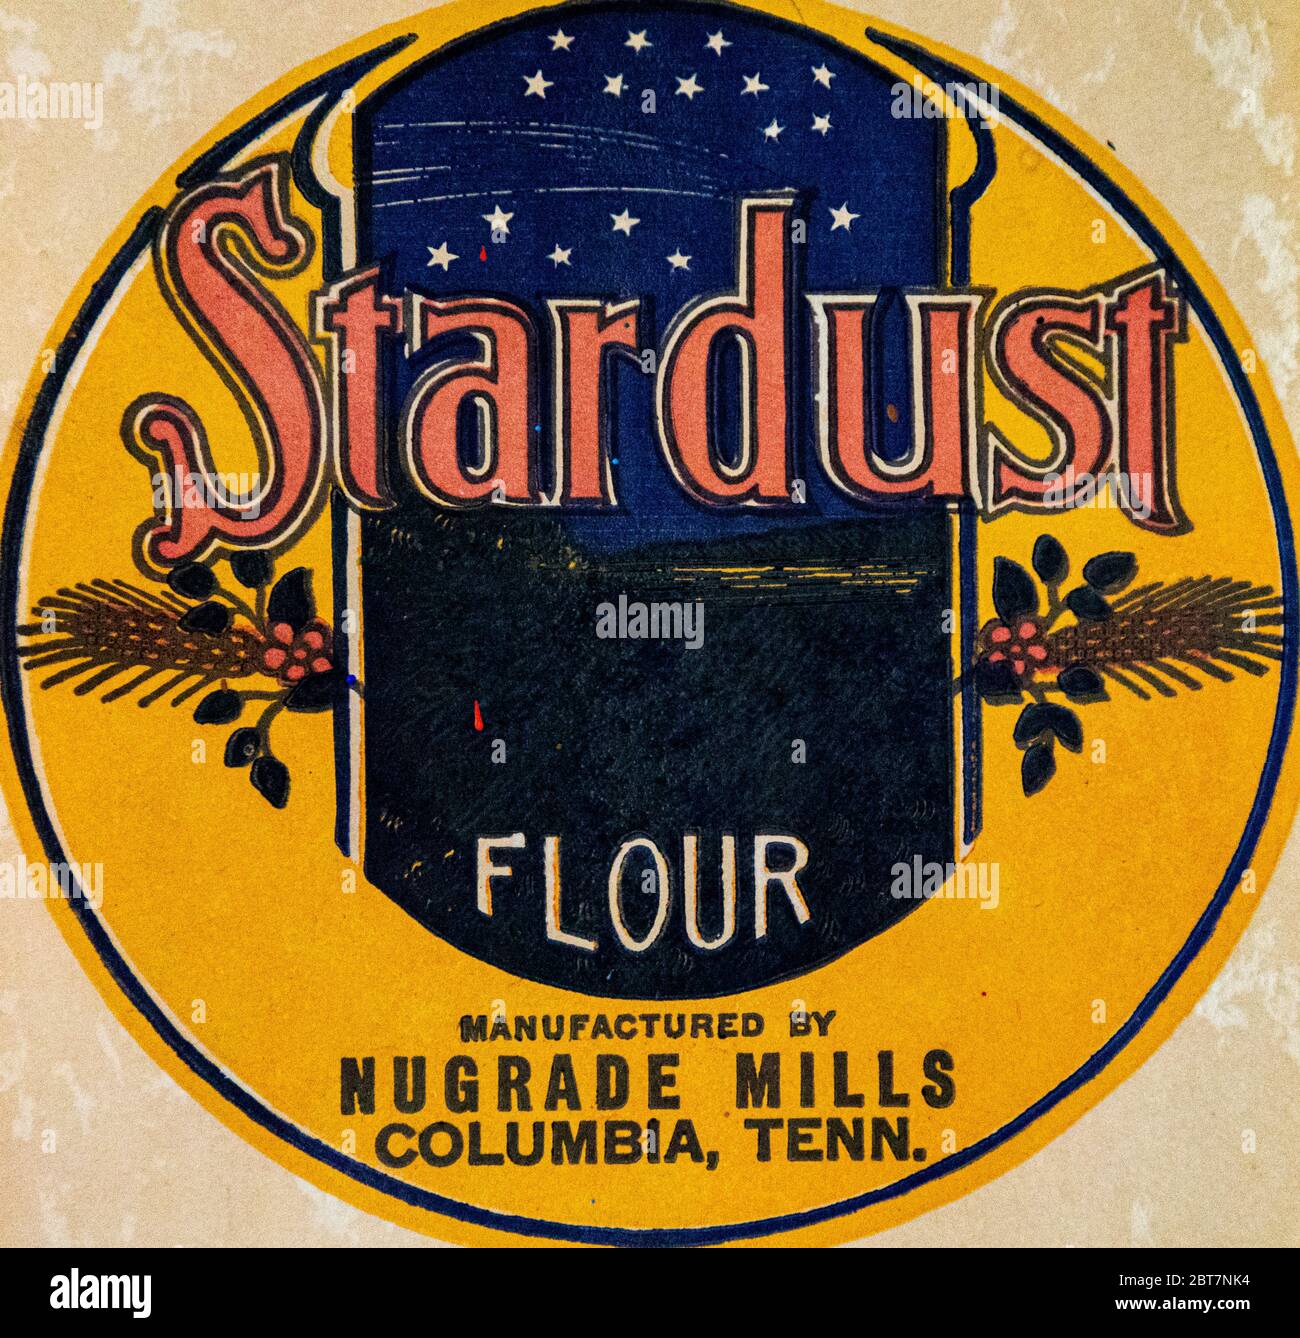 Old logo for Stardust Flour, Columbia, Tennessee Stock Photo